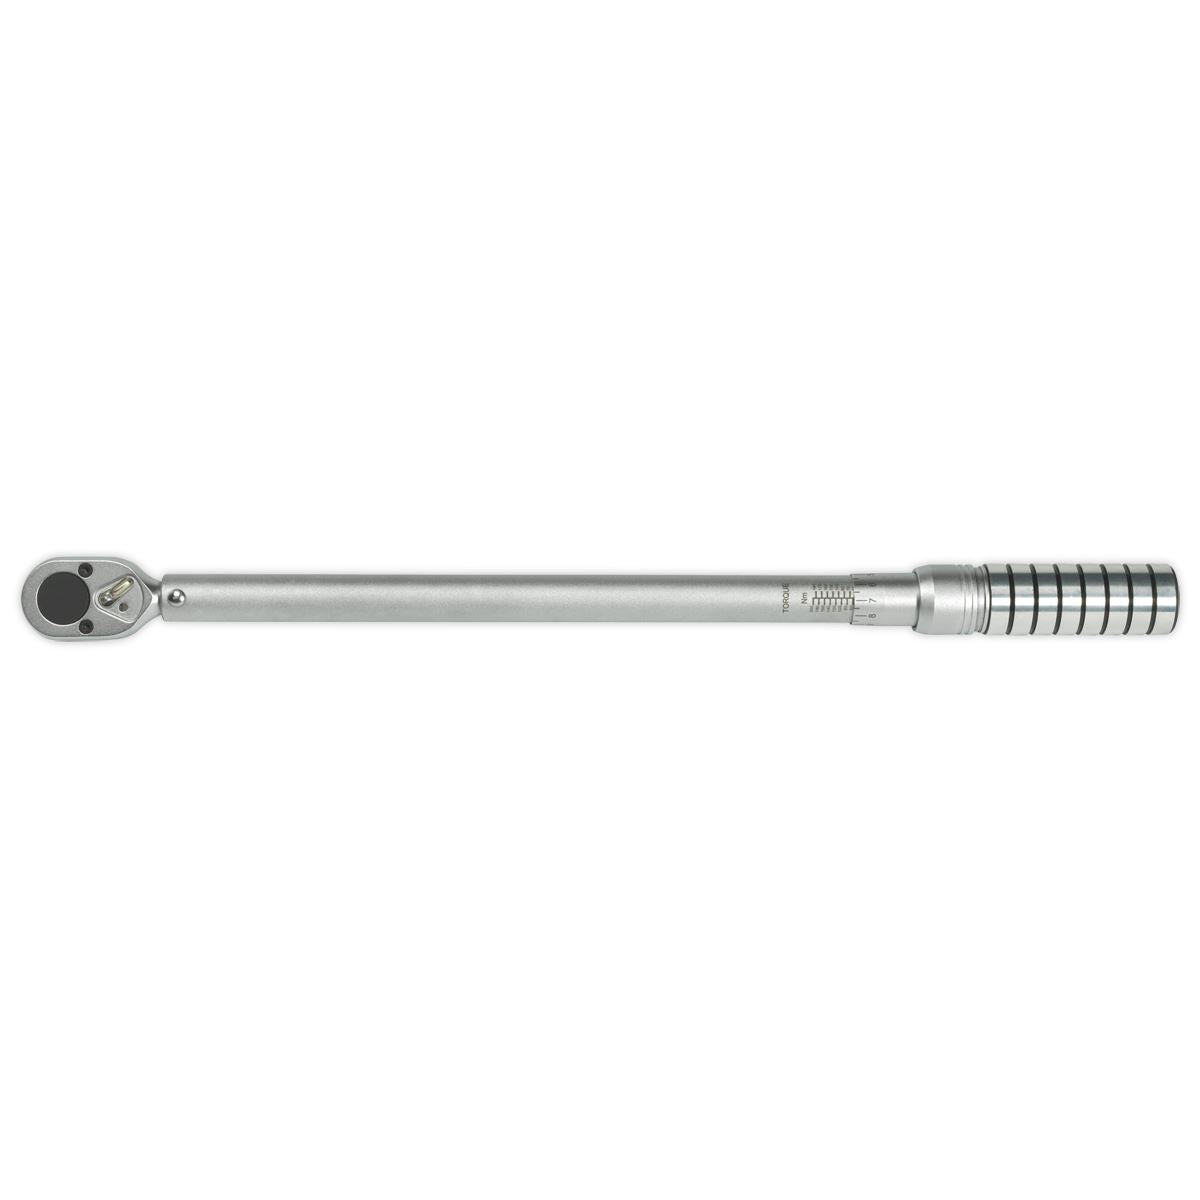 Sealey Premier Torque Wrench Micrometer Style 1/2"Sq Drive 40-200Nm(29.5-148lb.ft) - Calibrated